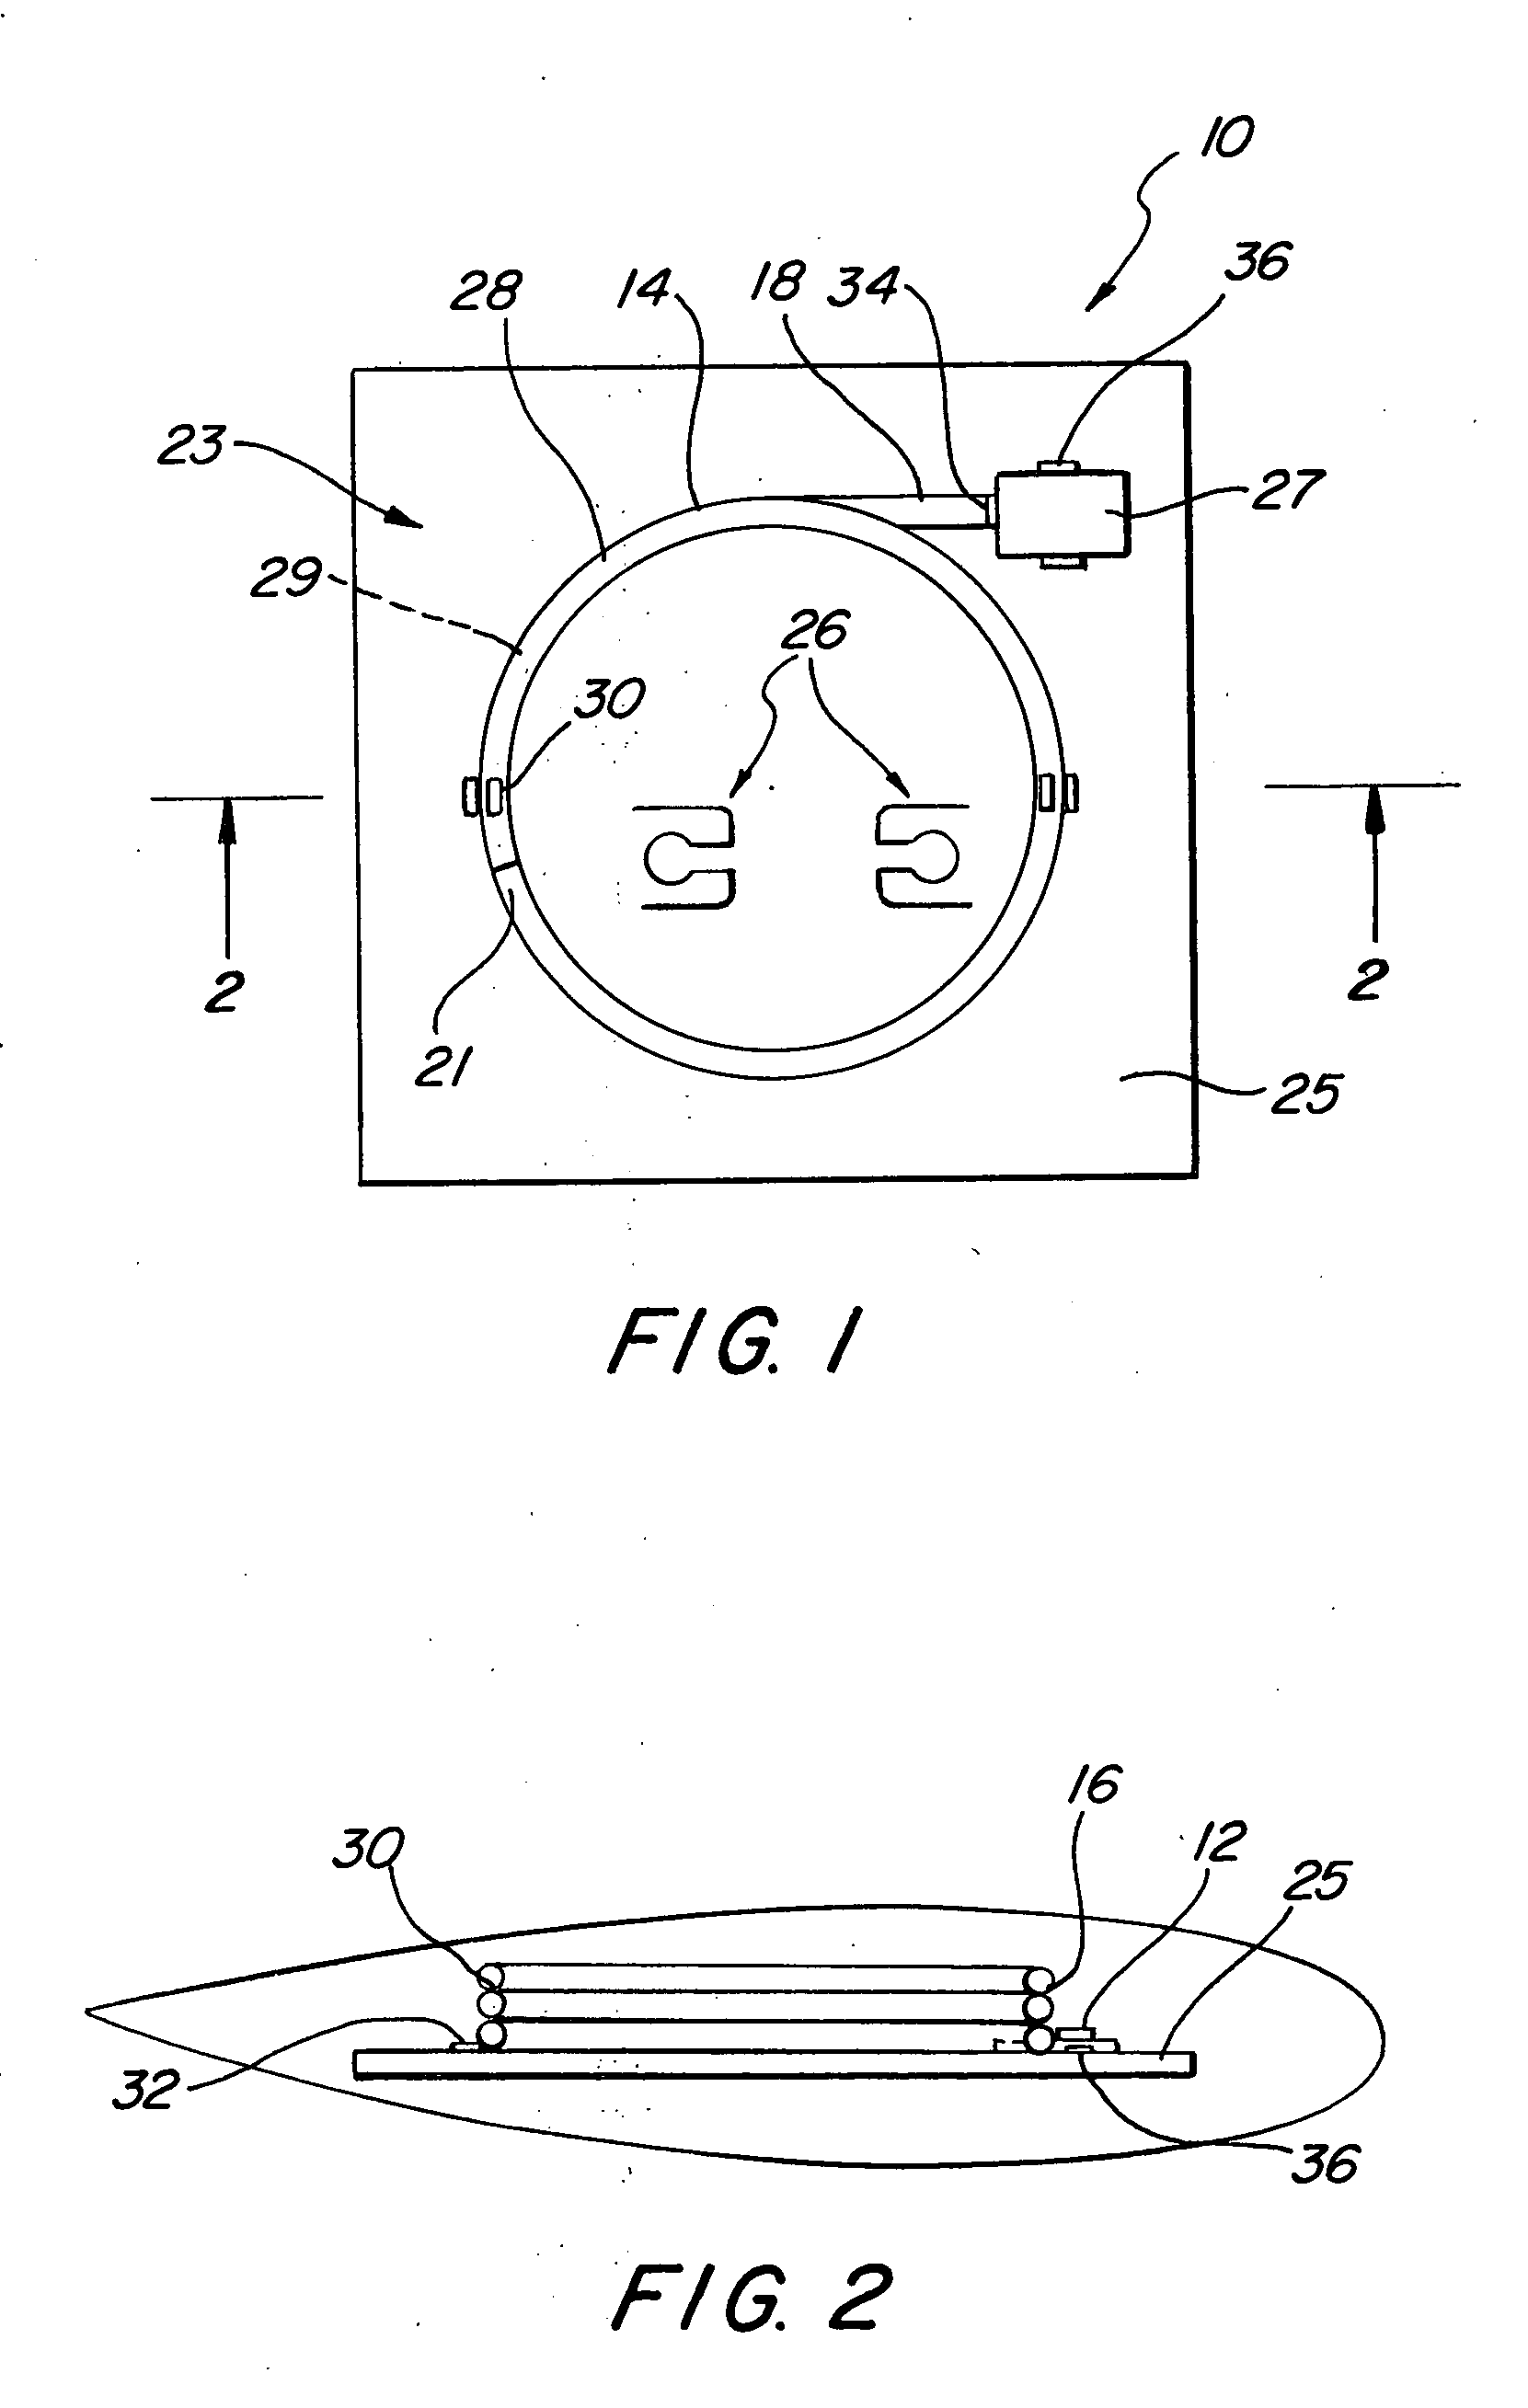 Apparatus and method for packaging elongate surgical devices